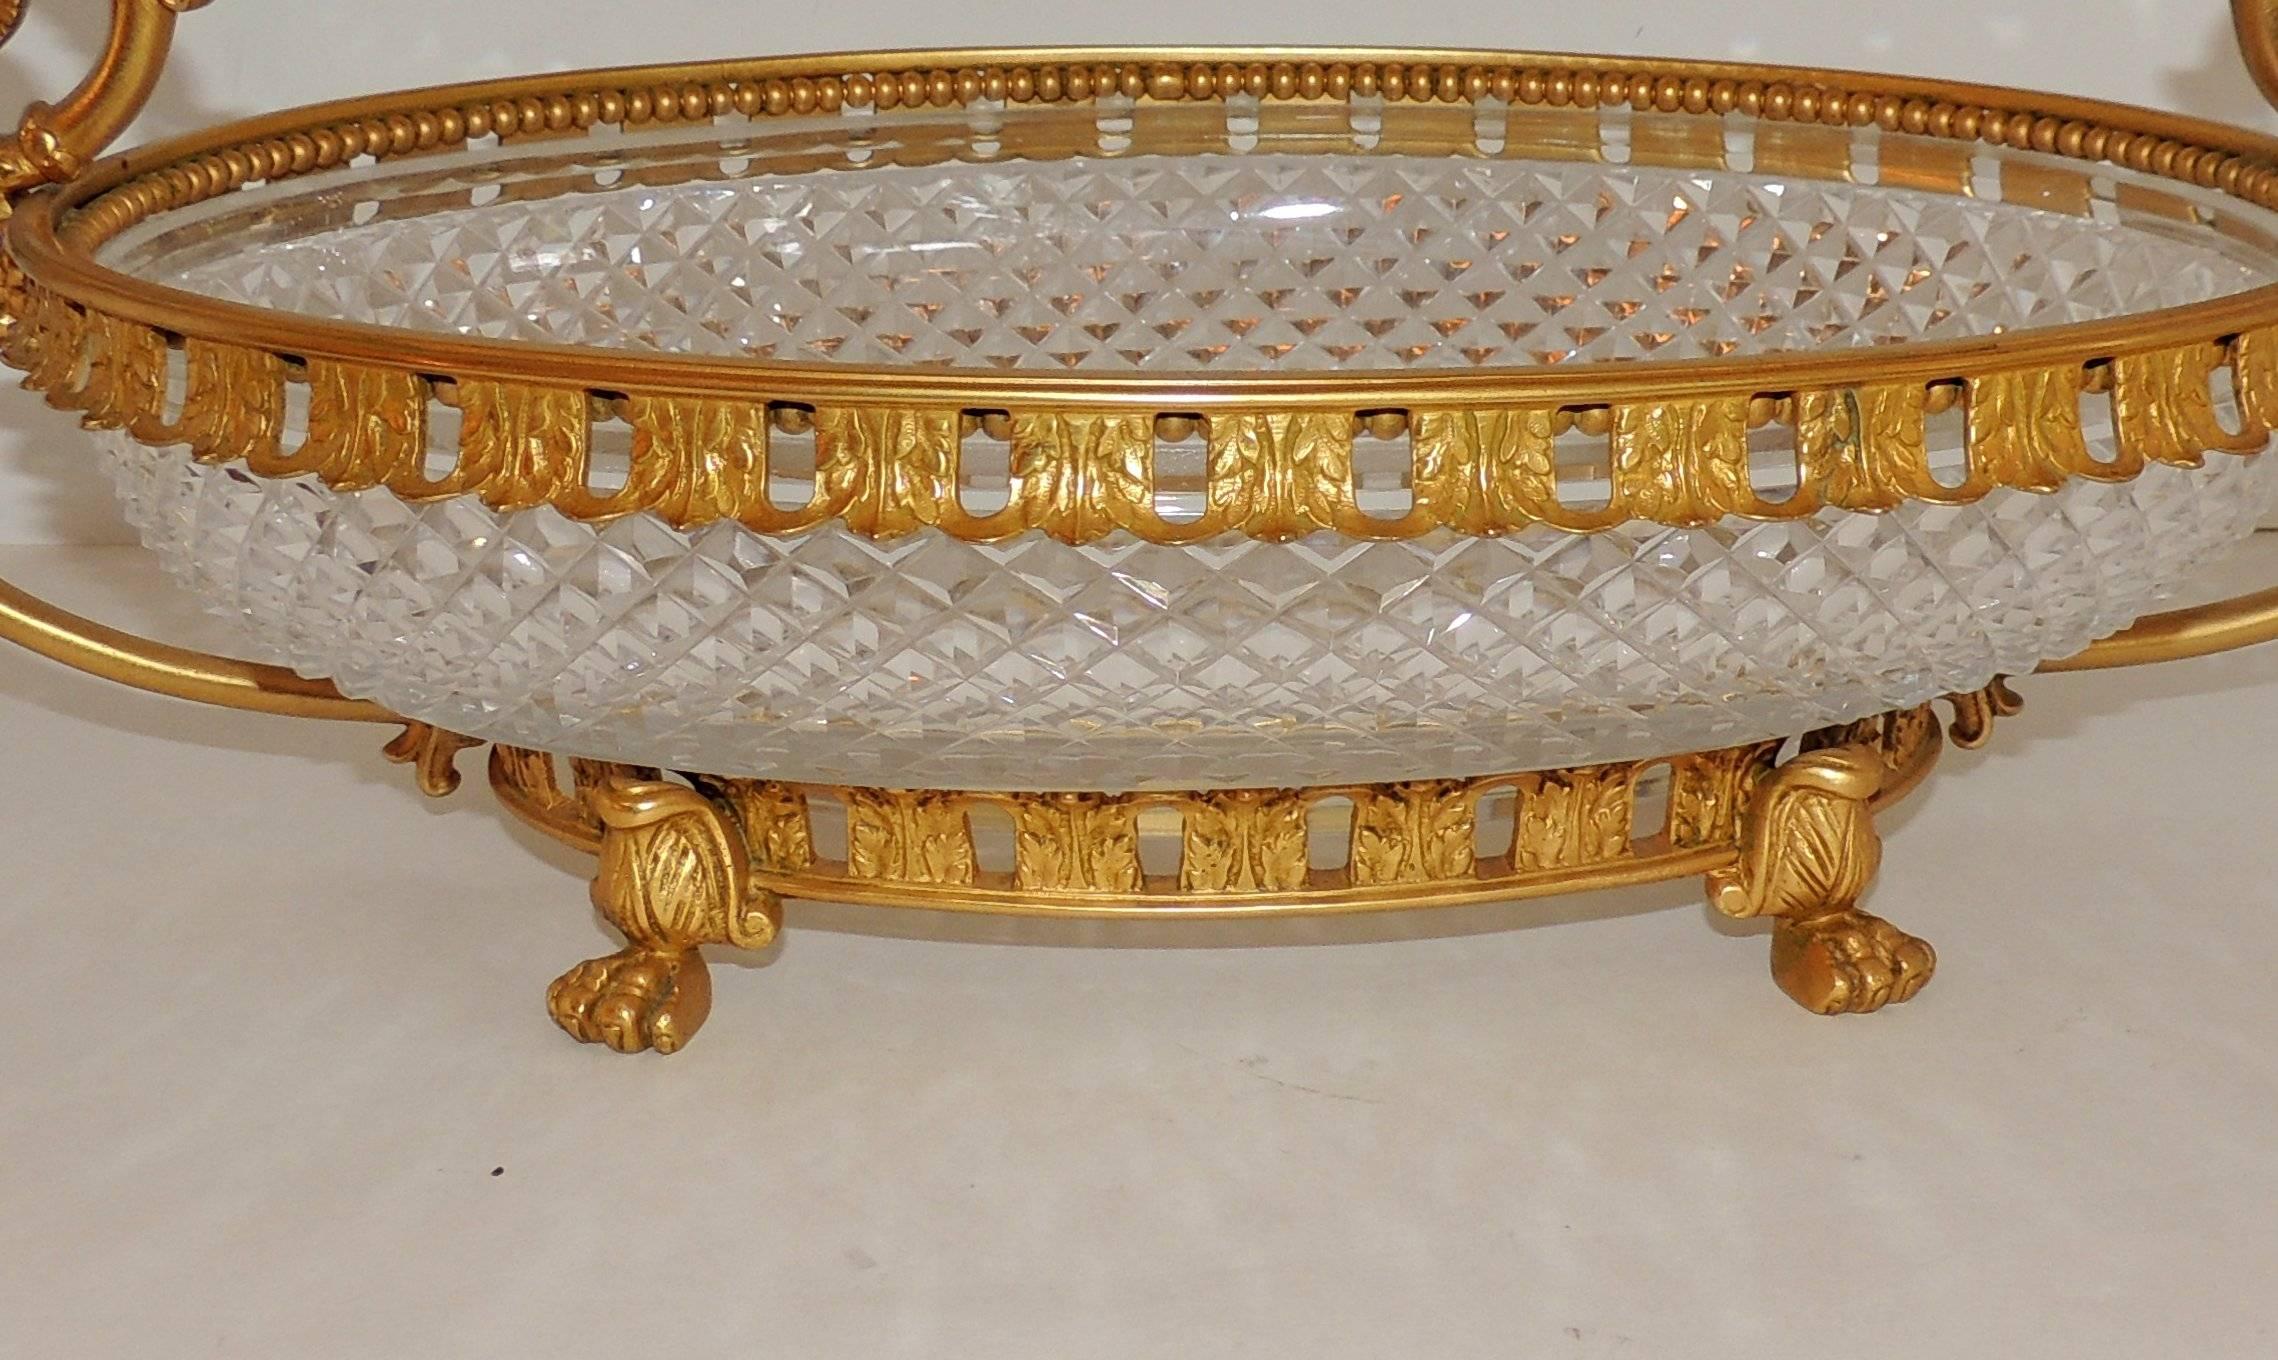 19th Century Wonderful French Dore Bronze and Cut Crystal Oval Centerpiece Lions Feet Handles